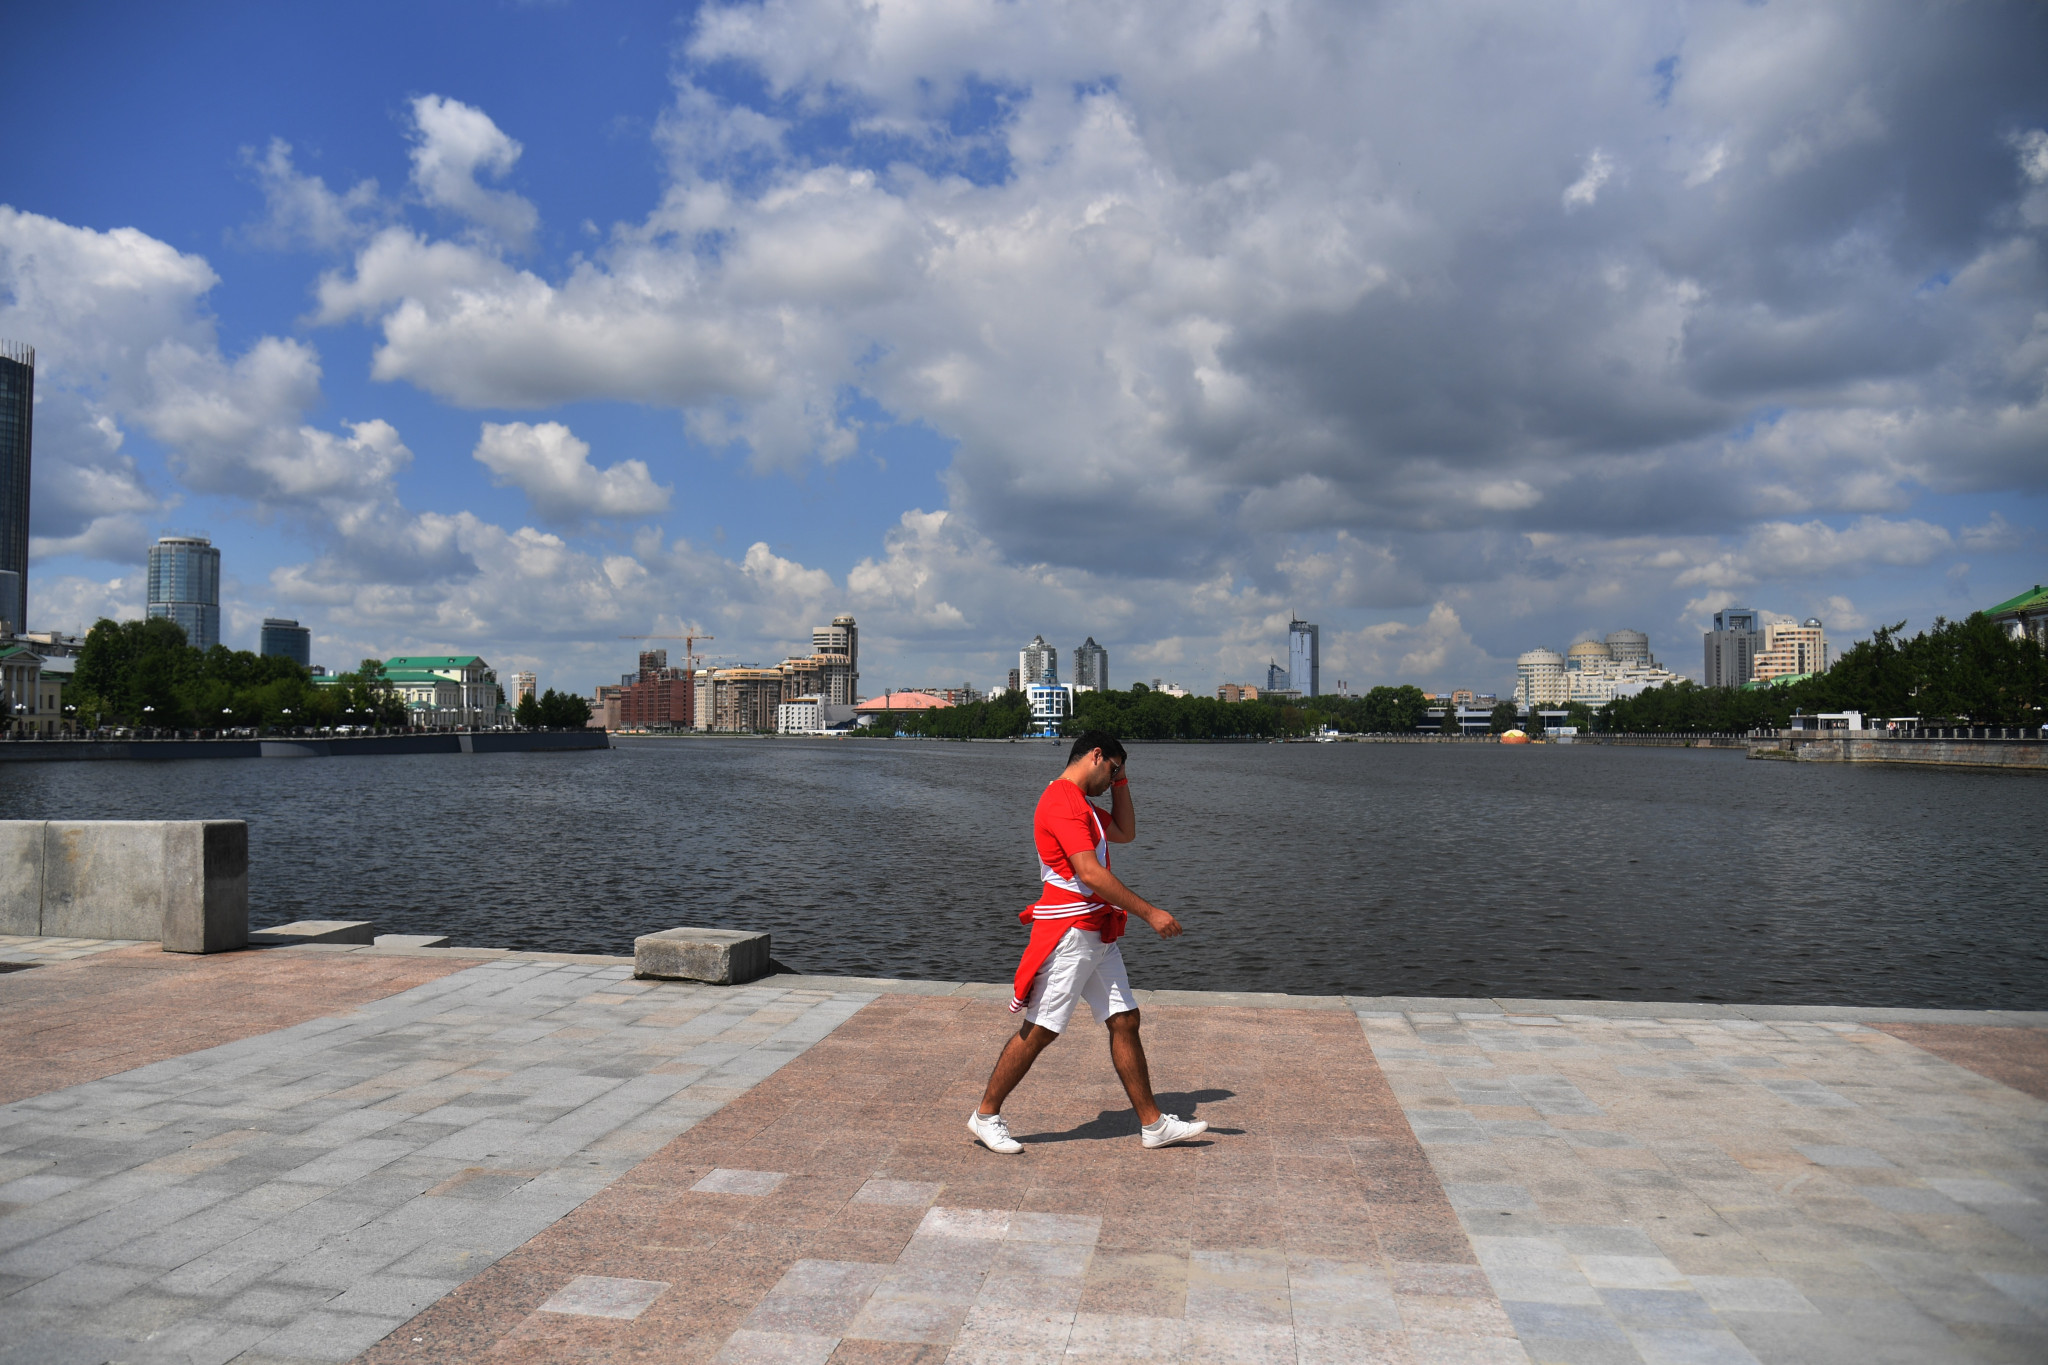 Yekaterinburg is due to host the inaugural FISU World Cup Combat Sports in 2022 in preparation for the FISU World University Games the following year ©Getty Images